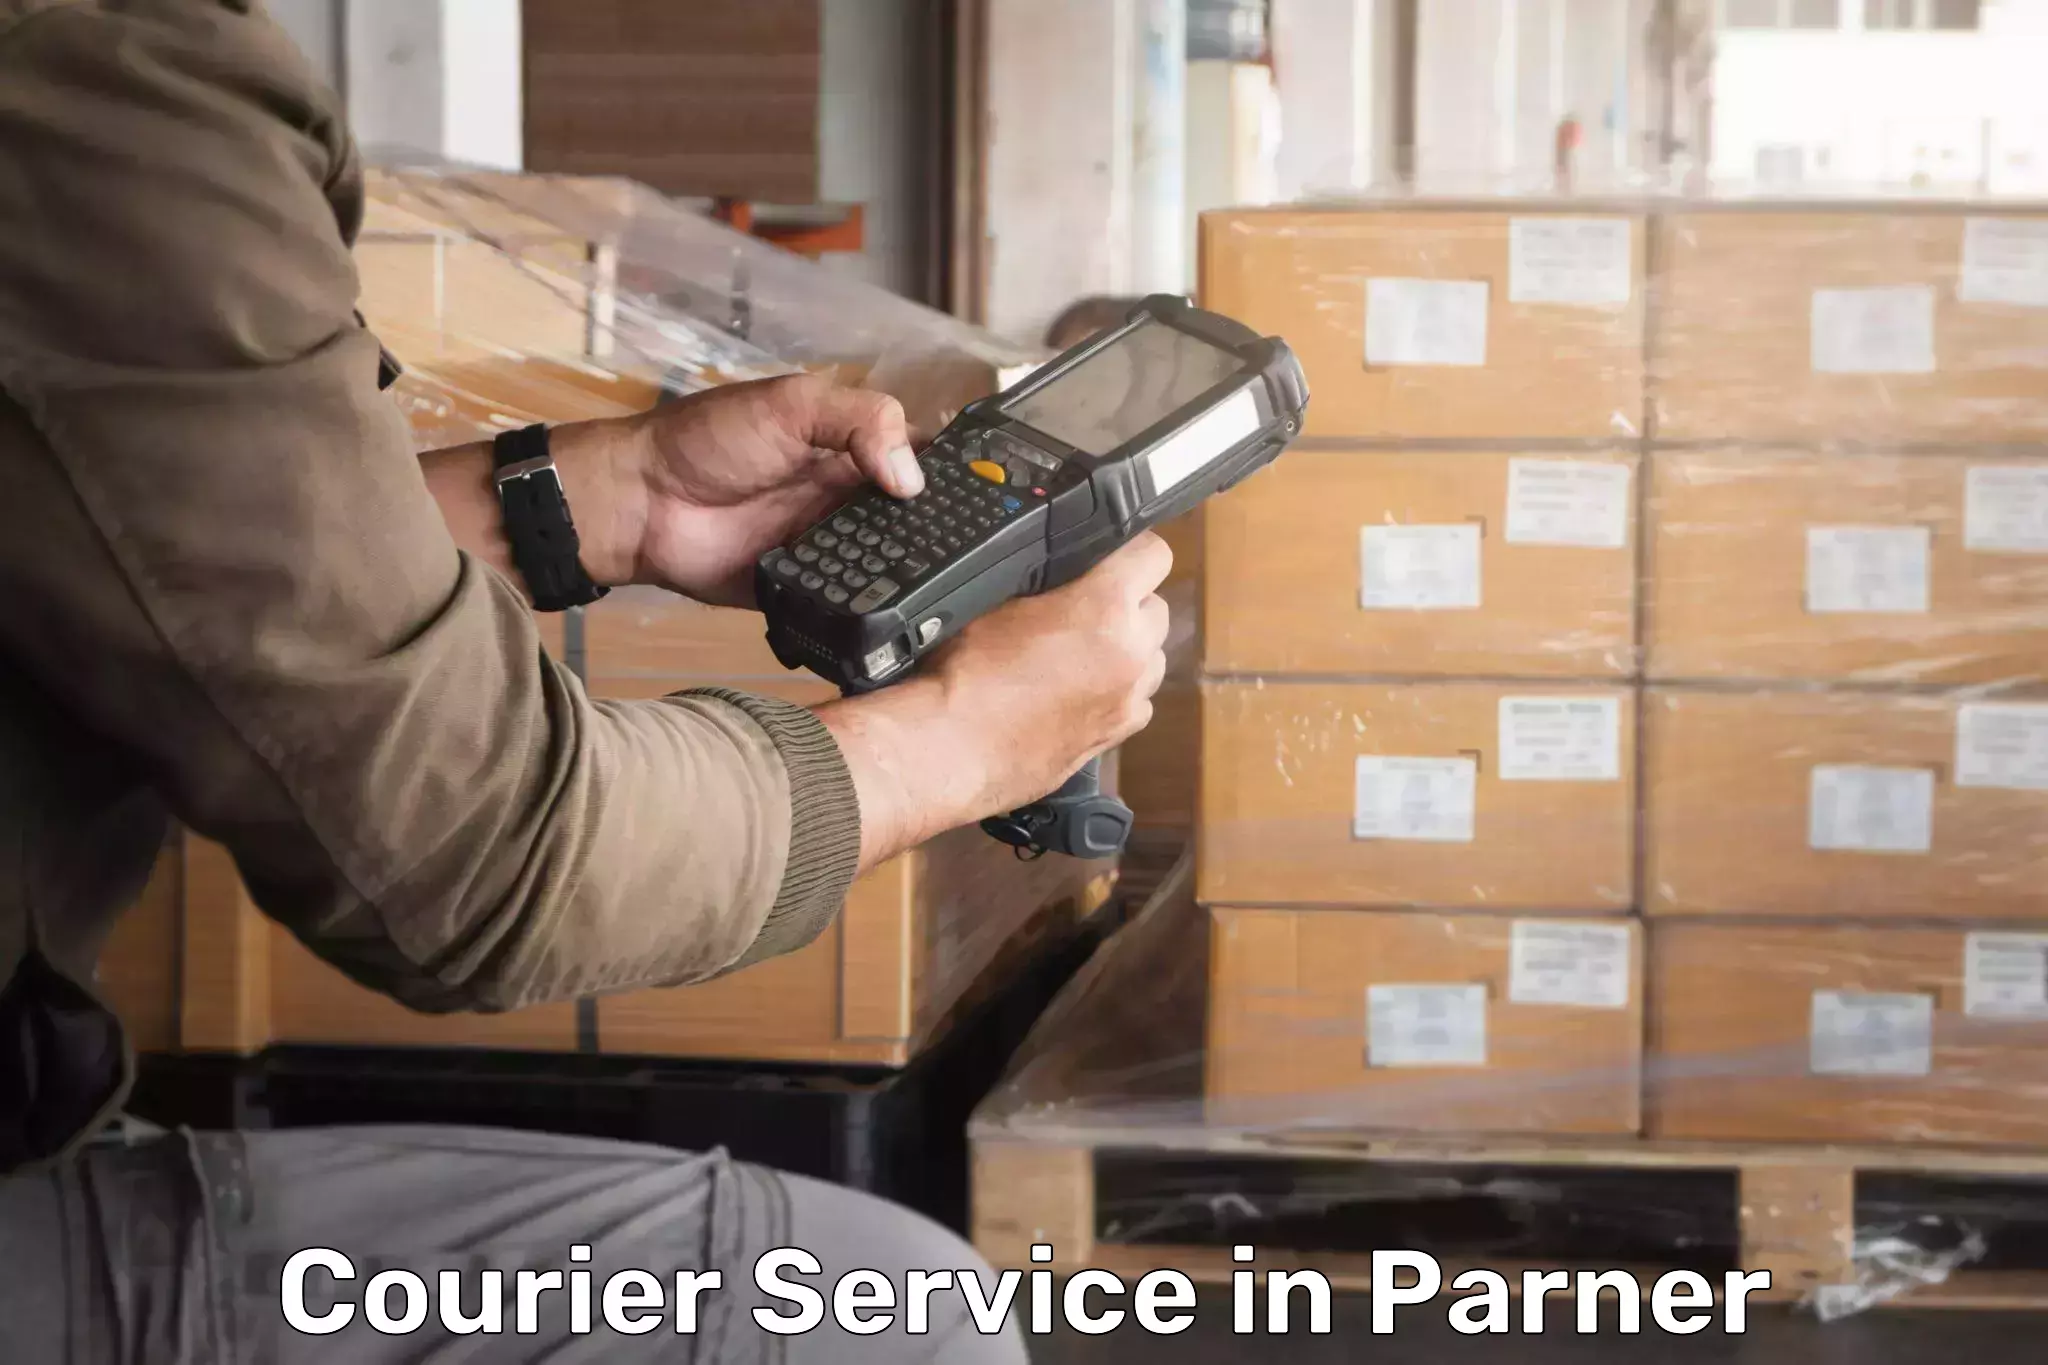 Postal and courier services in Parner